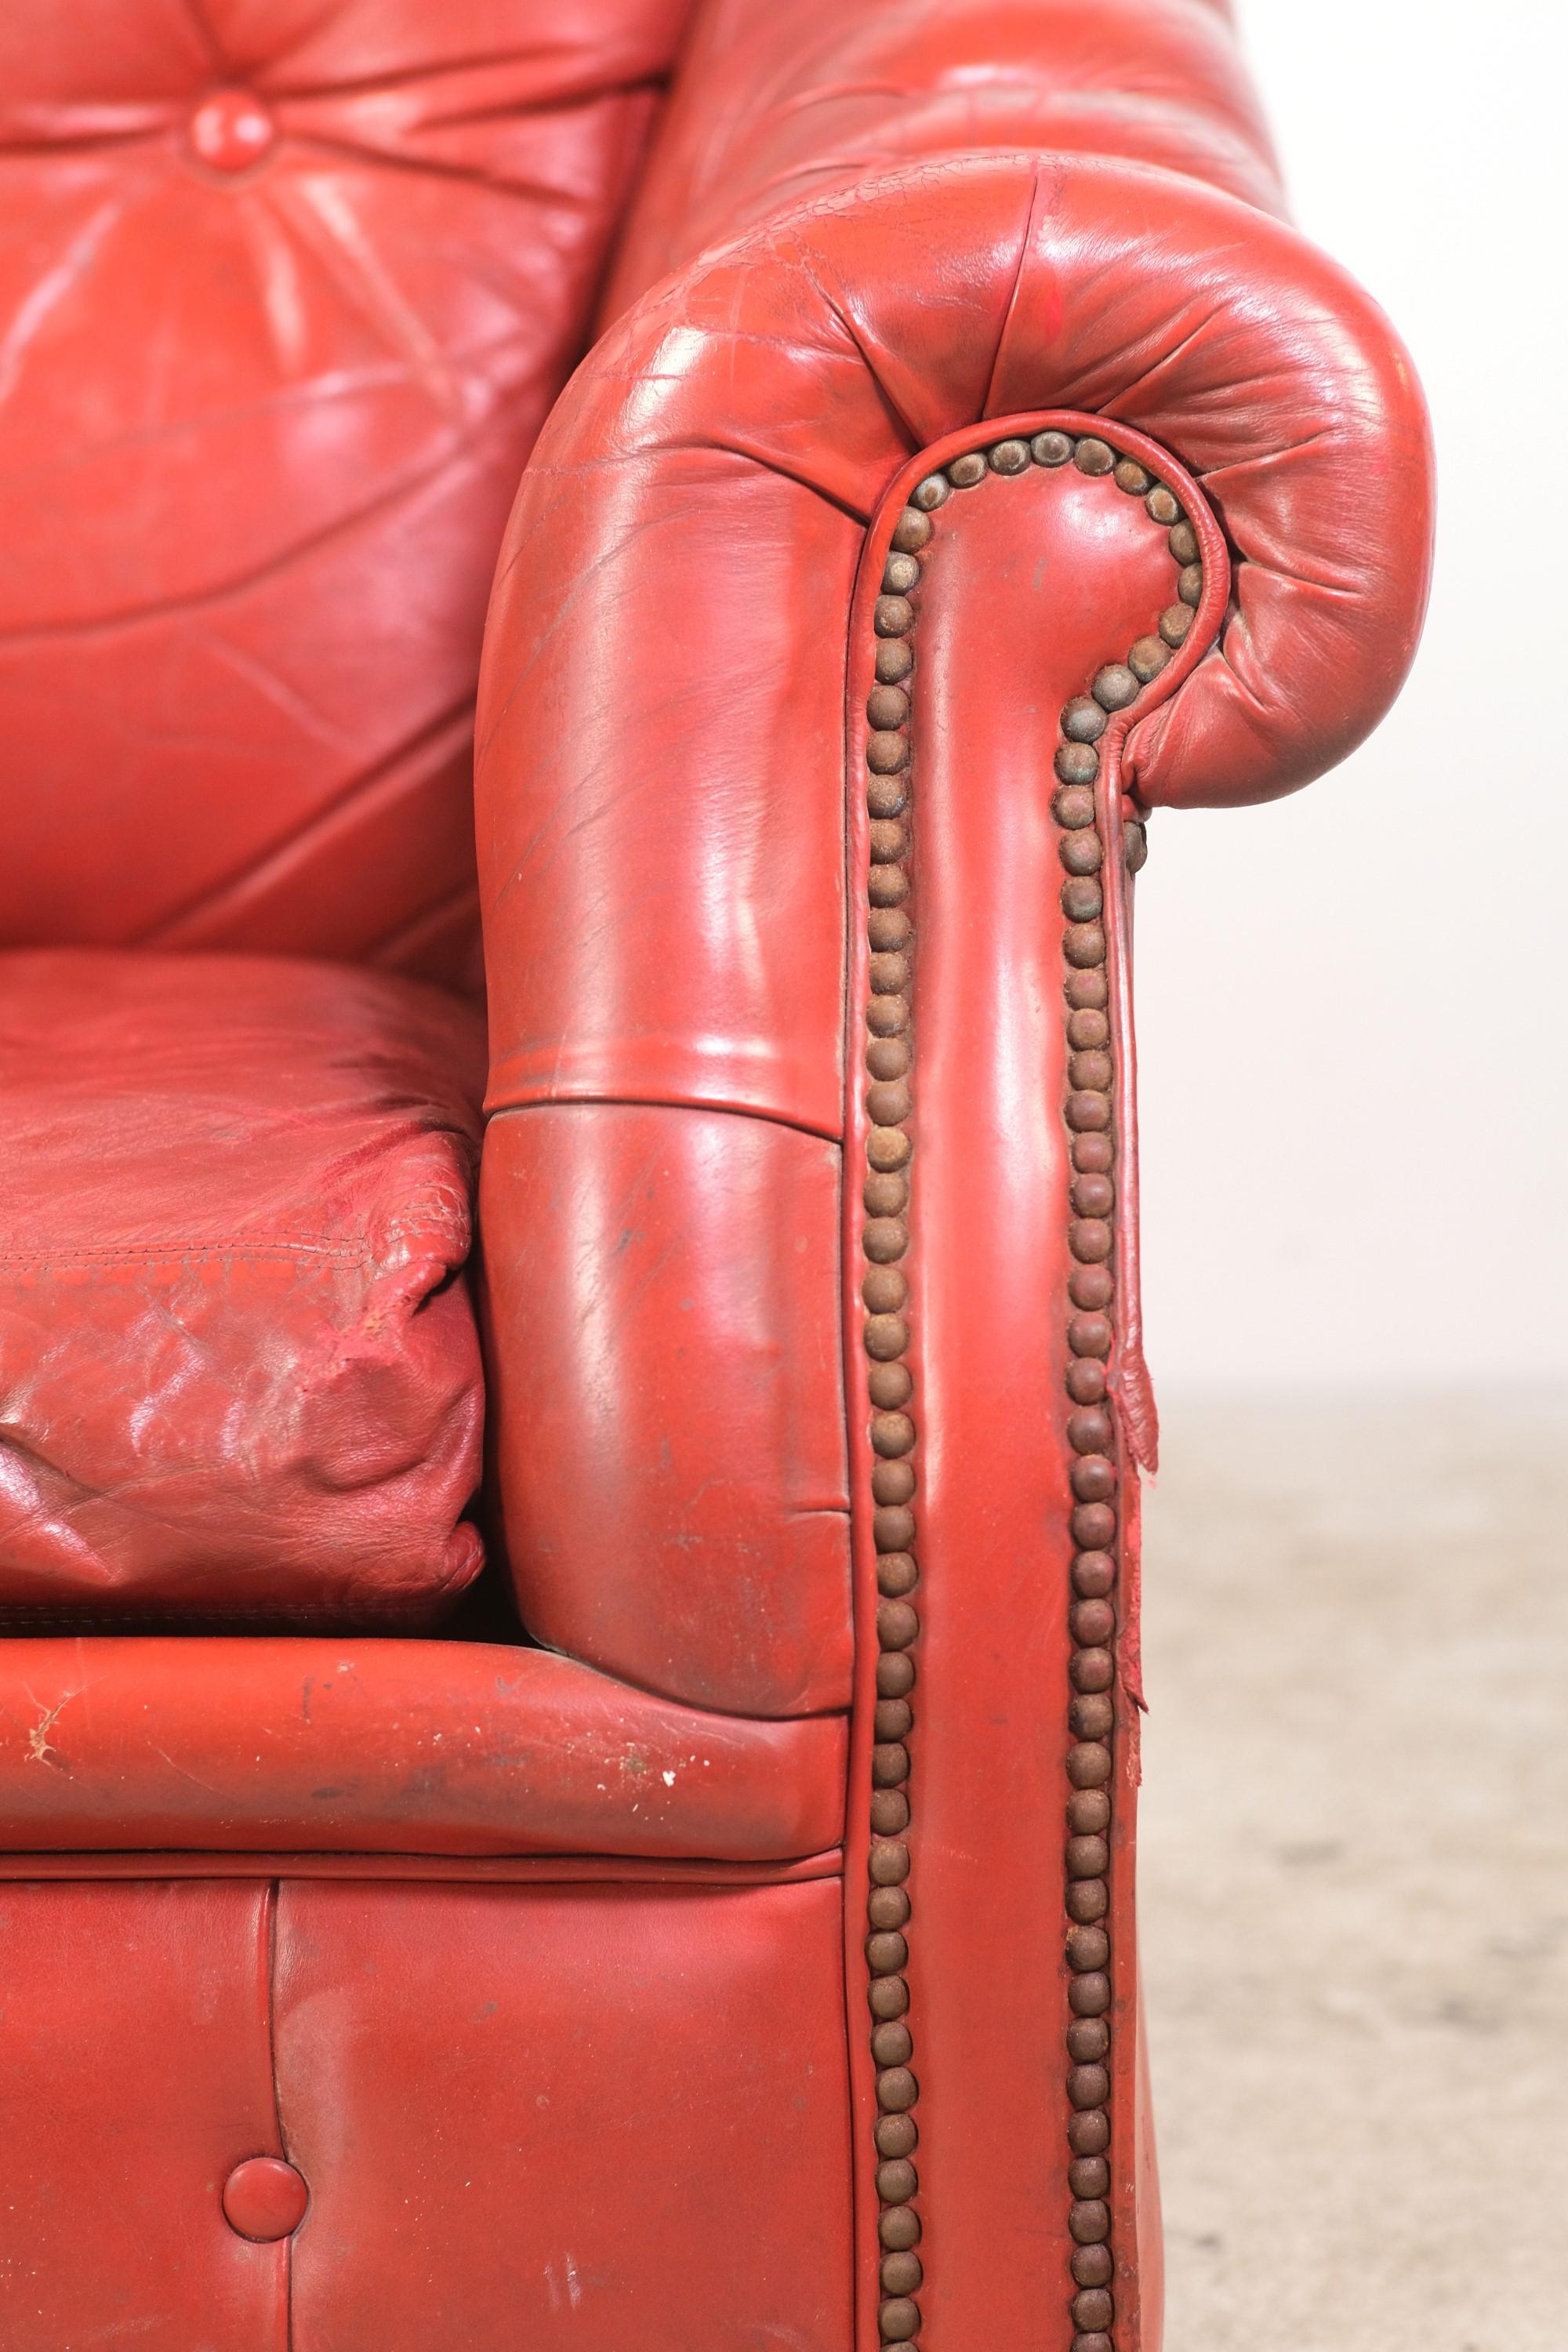 This European Chesterfield red armchair is tufted featuring deep buttons and studding along the trim. The front has round wooden feet and rolled arms with the back having red upholstered feet. This can be seen at our 400 Gilligan St location in